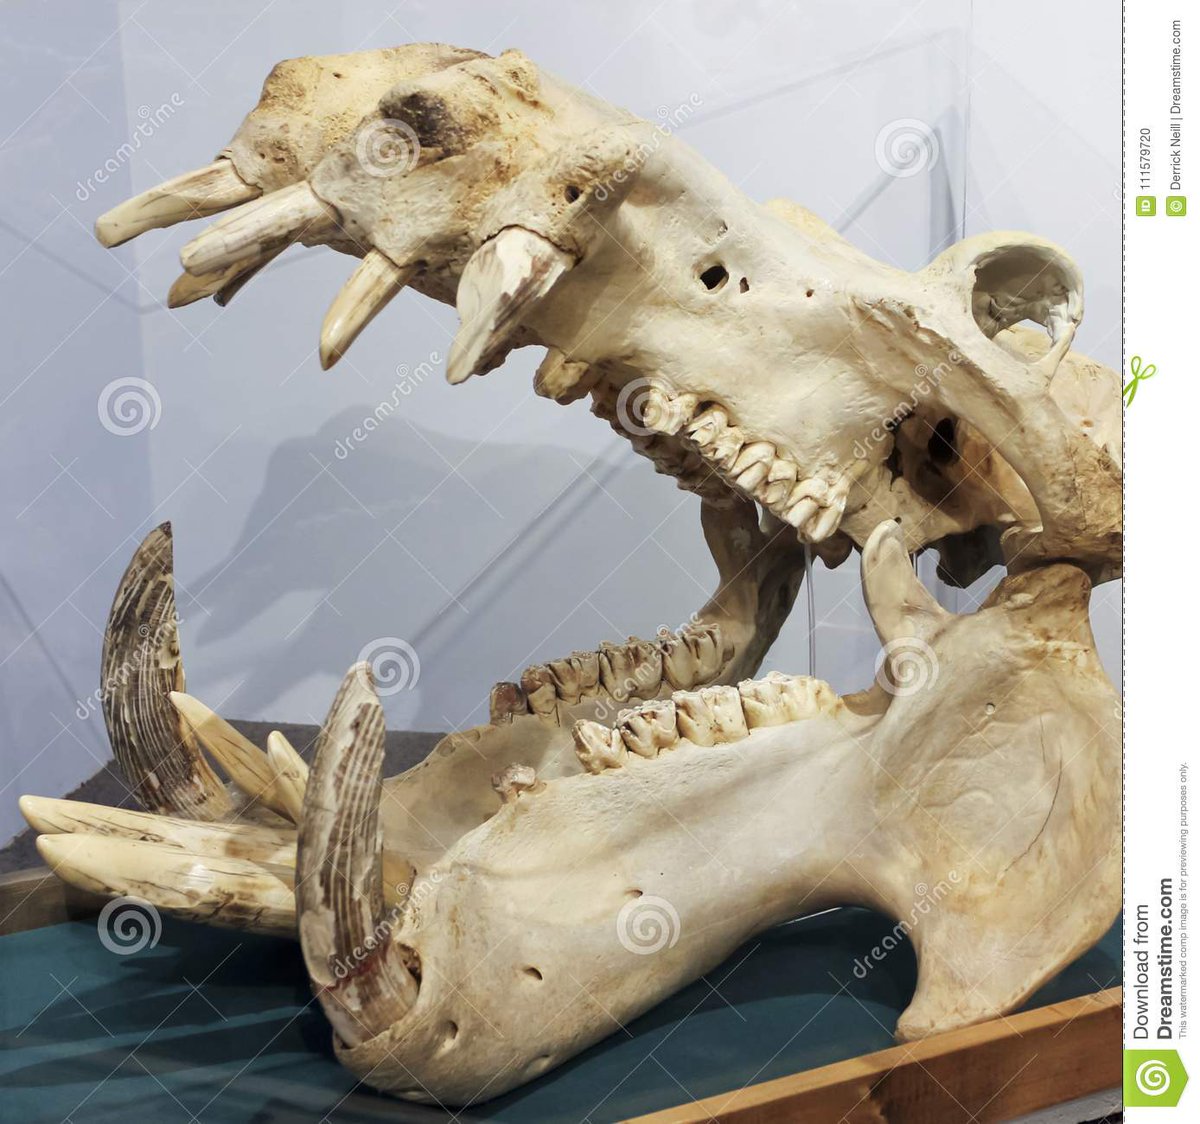 Minor update, but thanks to  @AutisticCosplay, I now know what a hippo's skull looks like, AND JESUS CHRIST. HOW METAL CAN ONE ANIMAL BE?